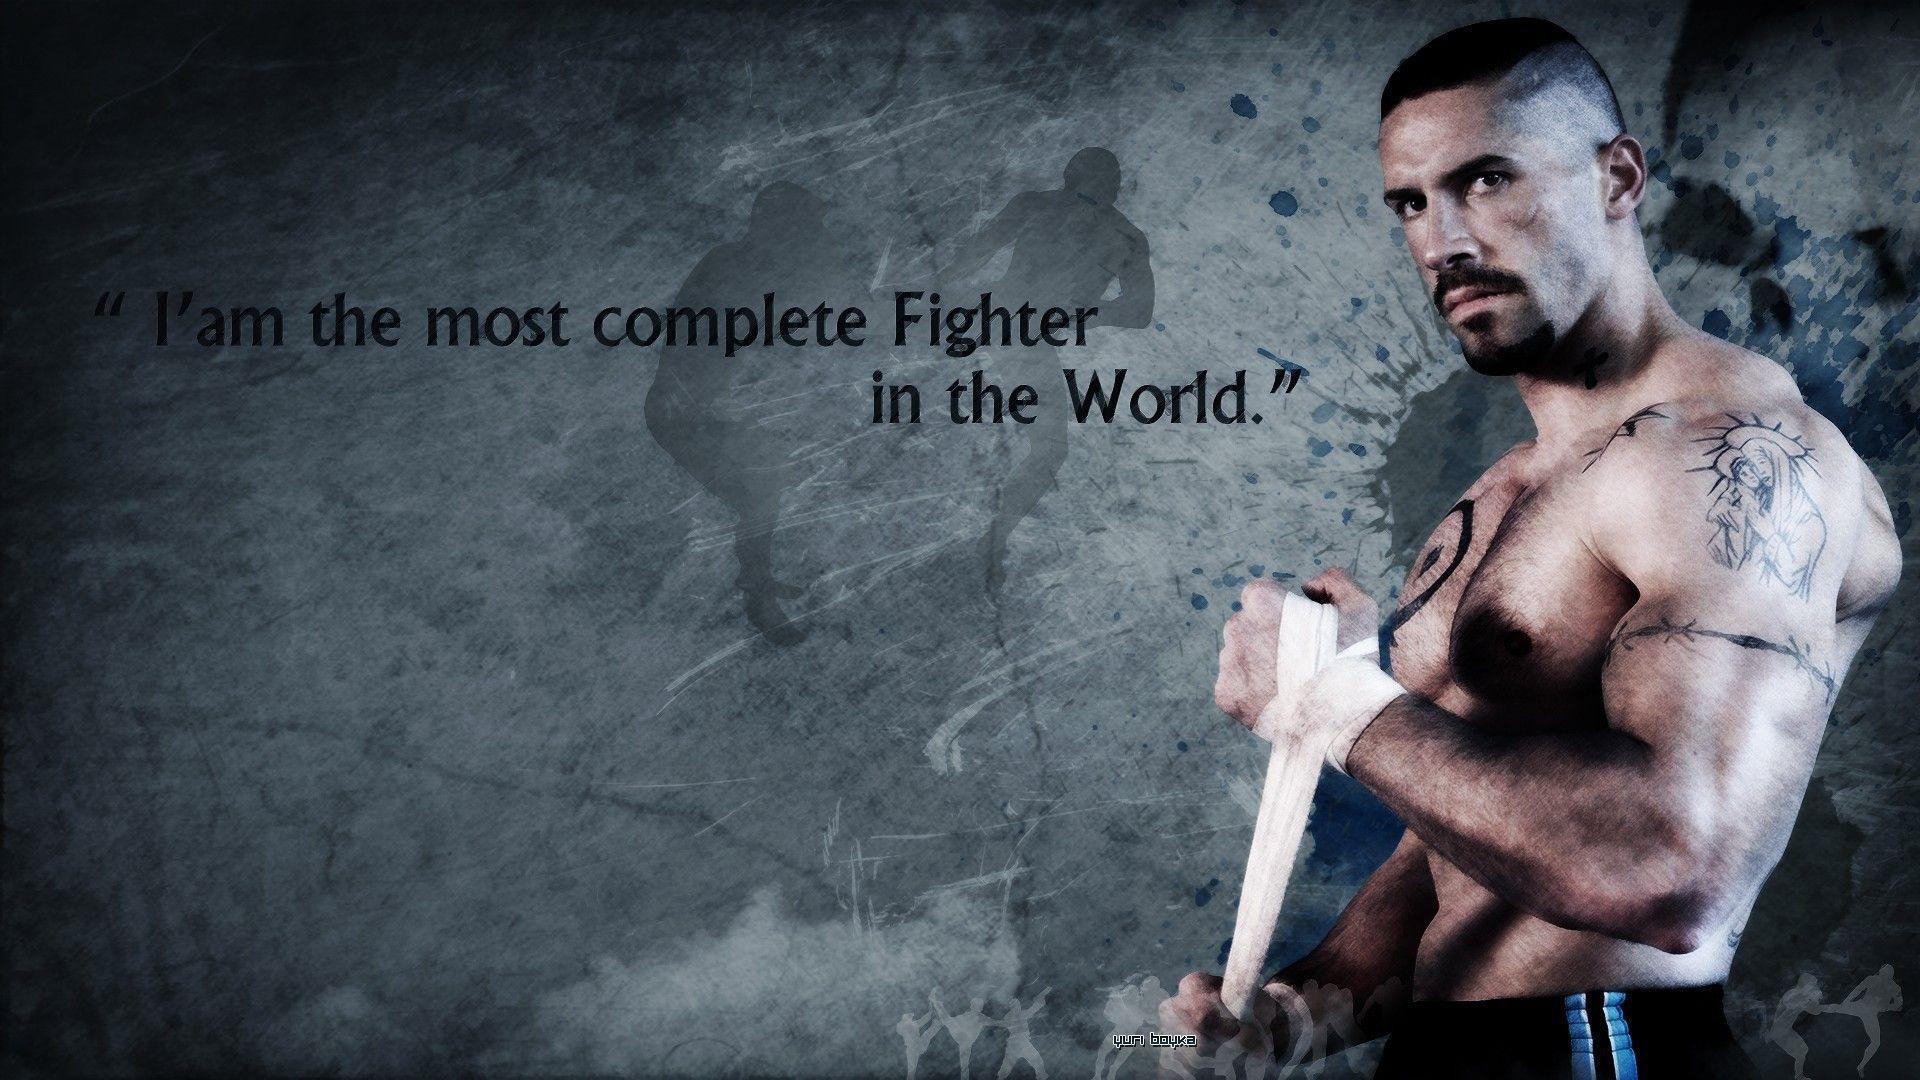 Scott Adkins as Boyka wallpaper and image, picture